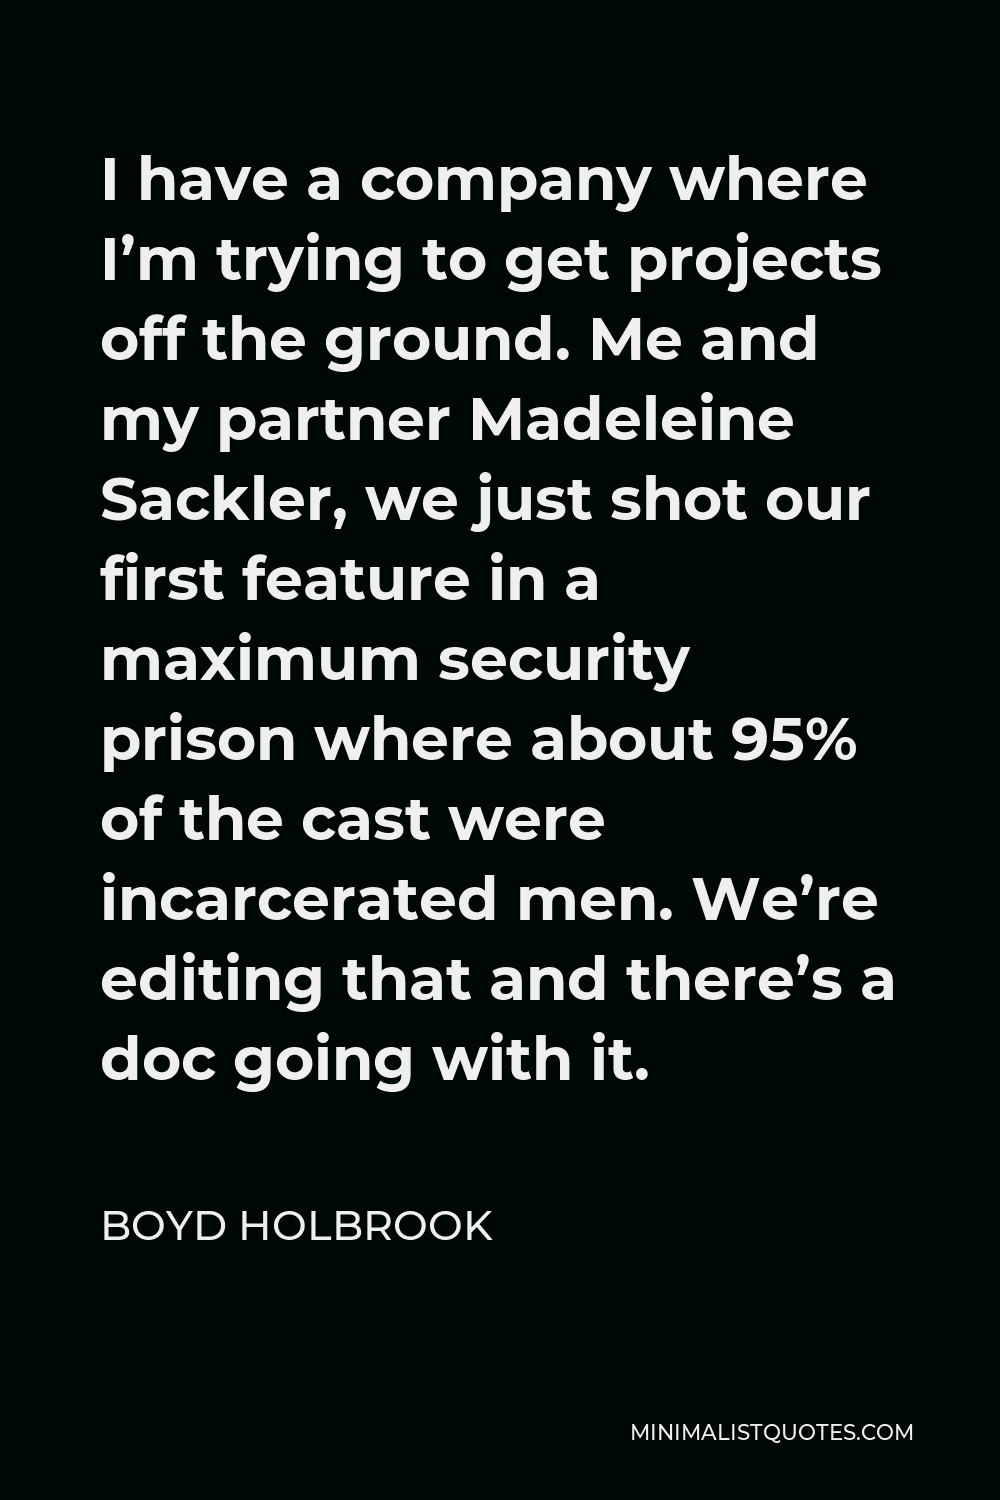 Boyd Holbrook Quote - I have a company where I’m trying to get projects off the ground. Me and my partner Madeleine Sackler, we just shot our first feature in a maximum security prison where about 95% of the cast were incarcerated men. We’re editing that and there’s a doc going with it.